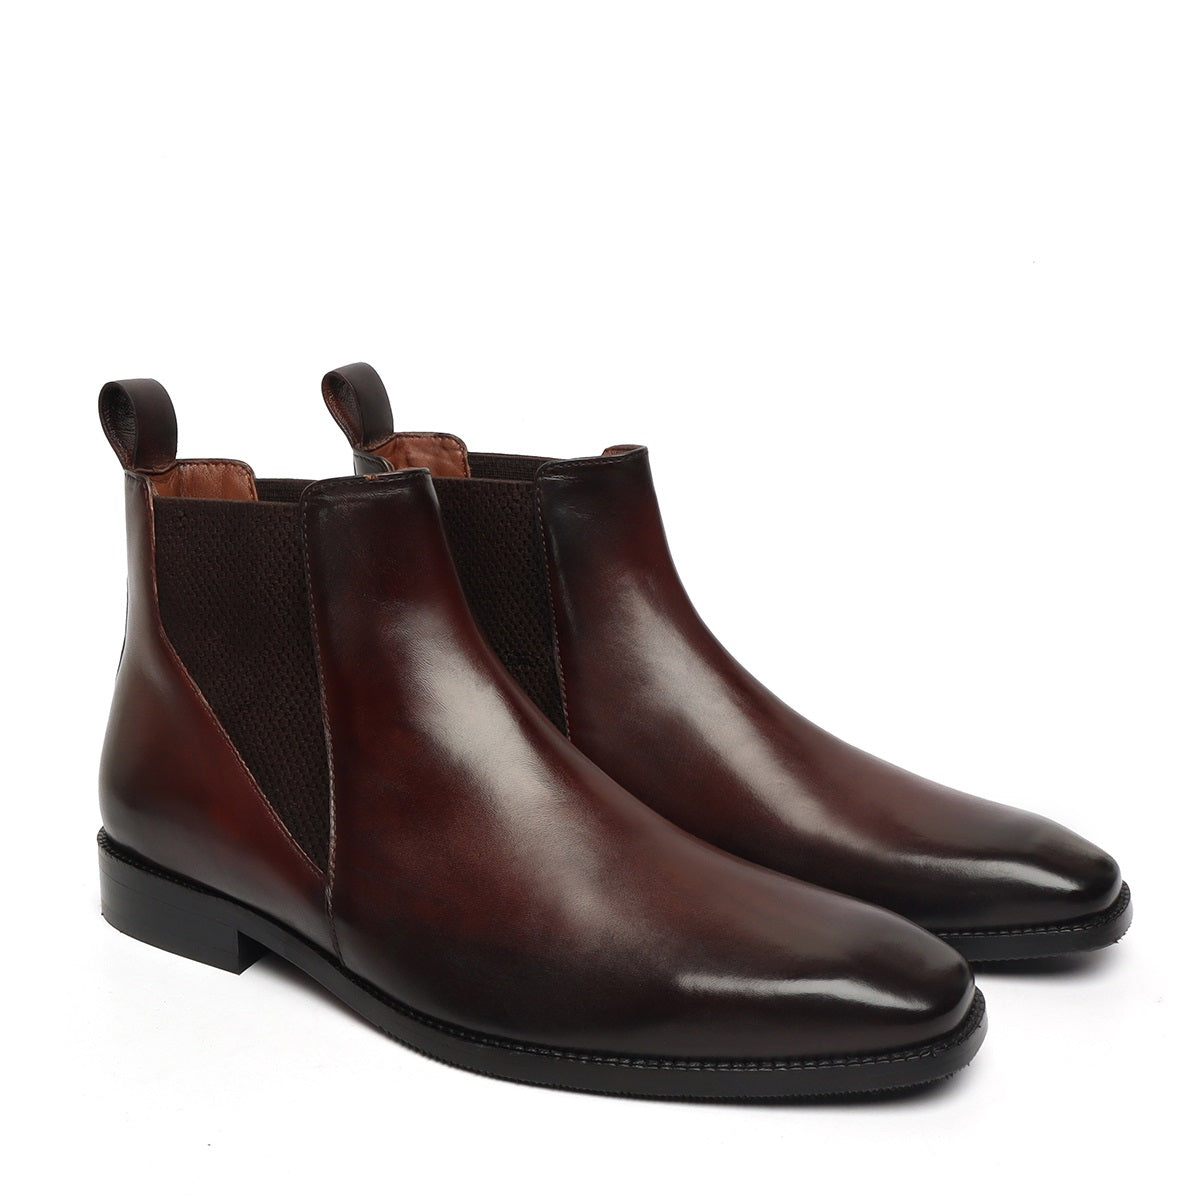 New shape Dark Brown Leather Chelsea Boot by Brune & Bareskin with a S